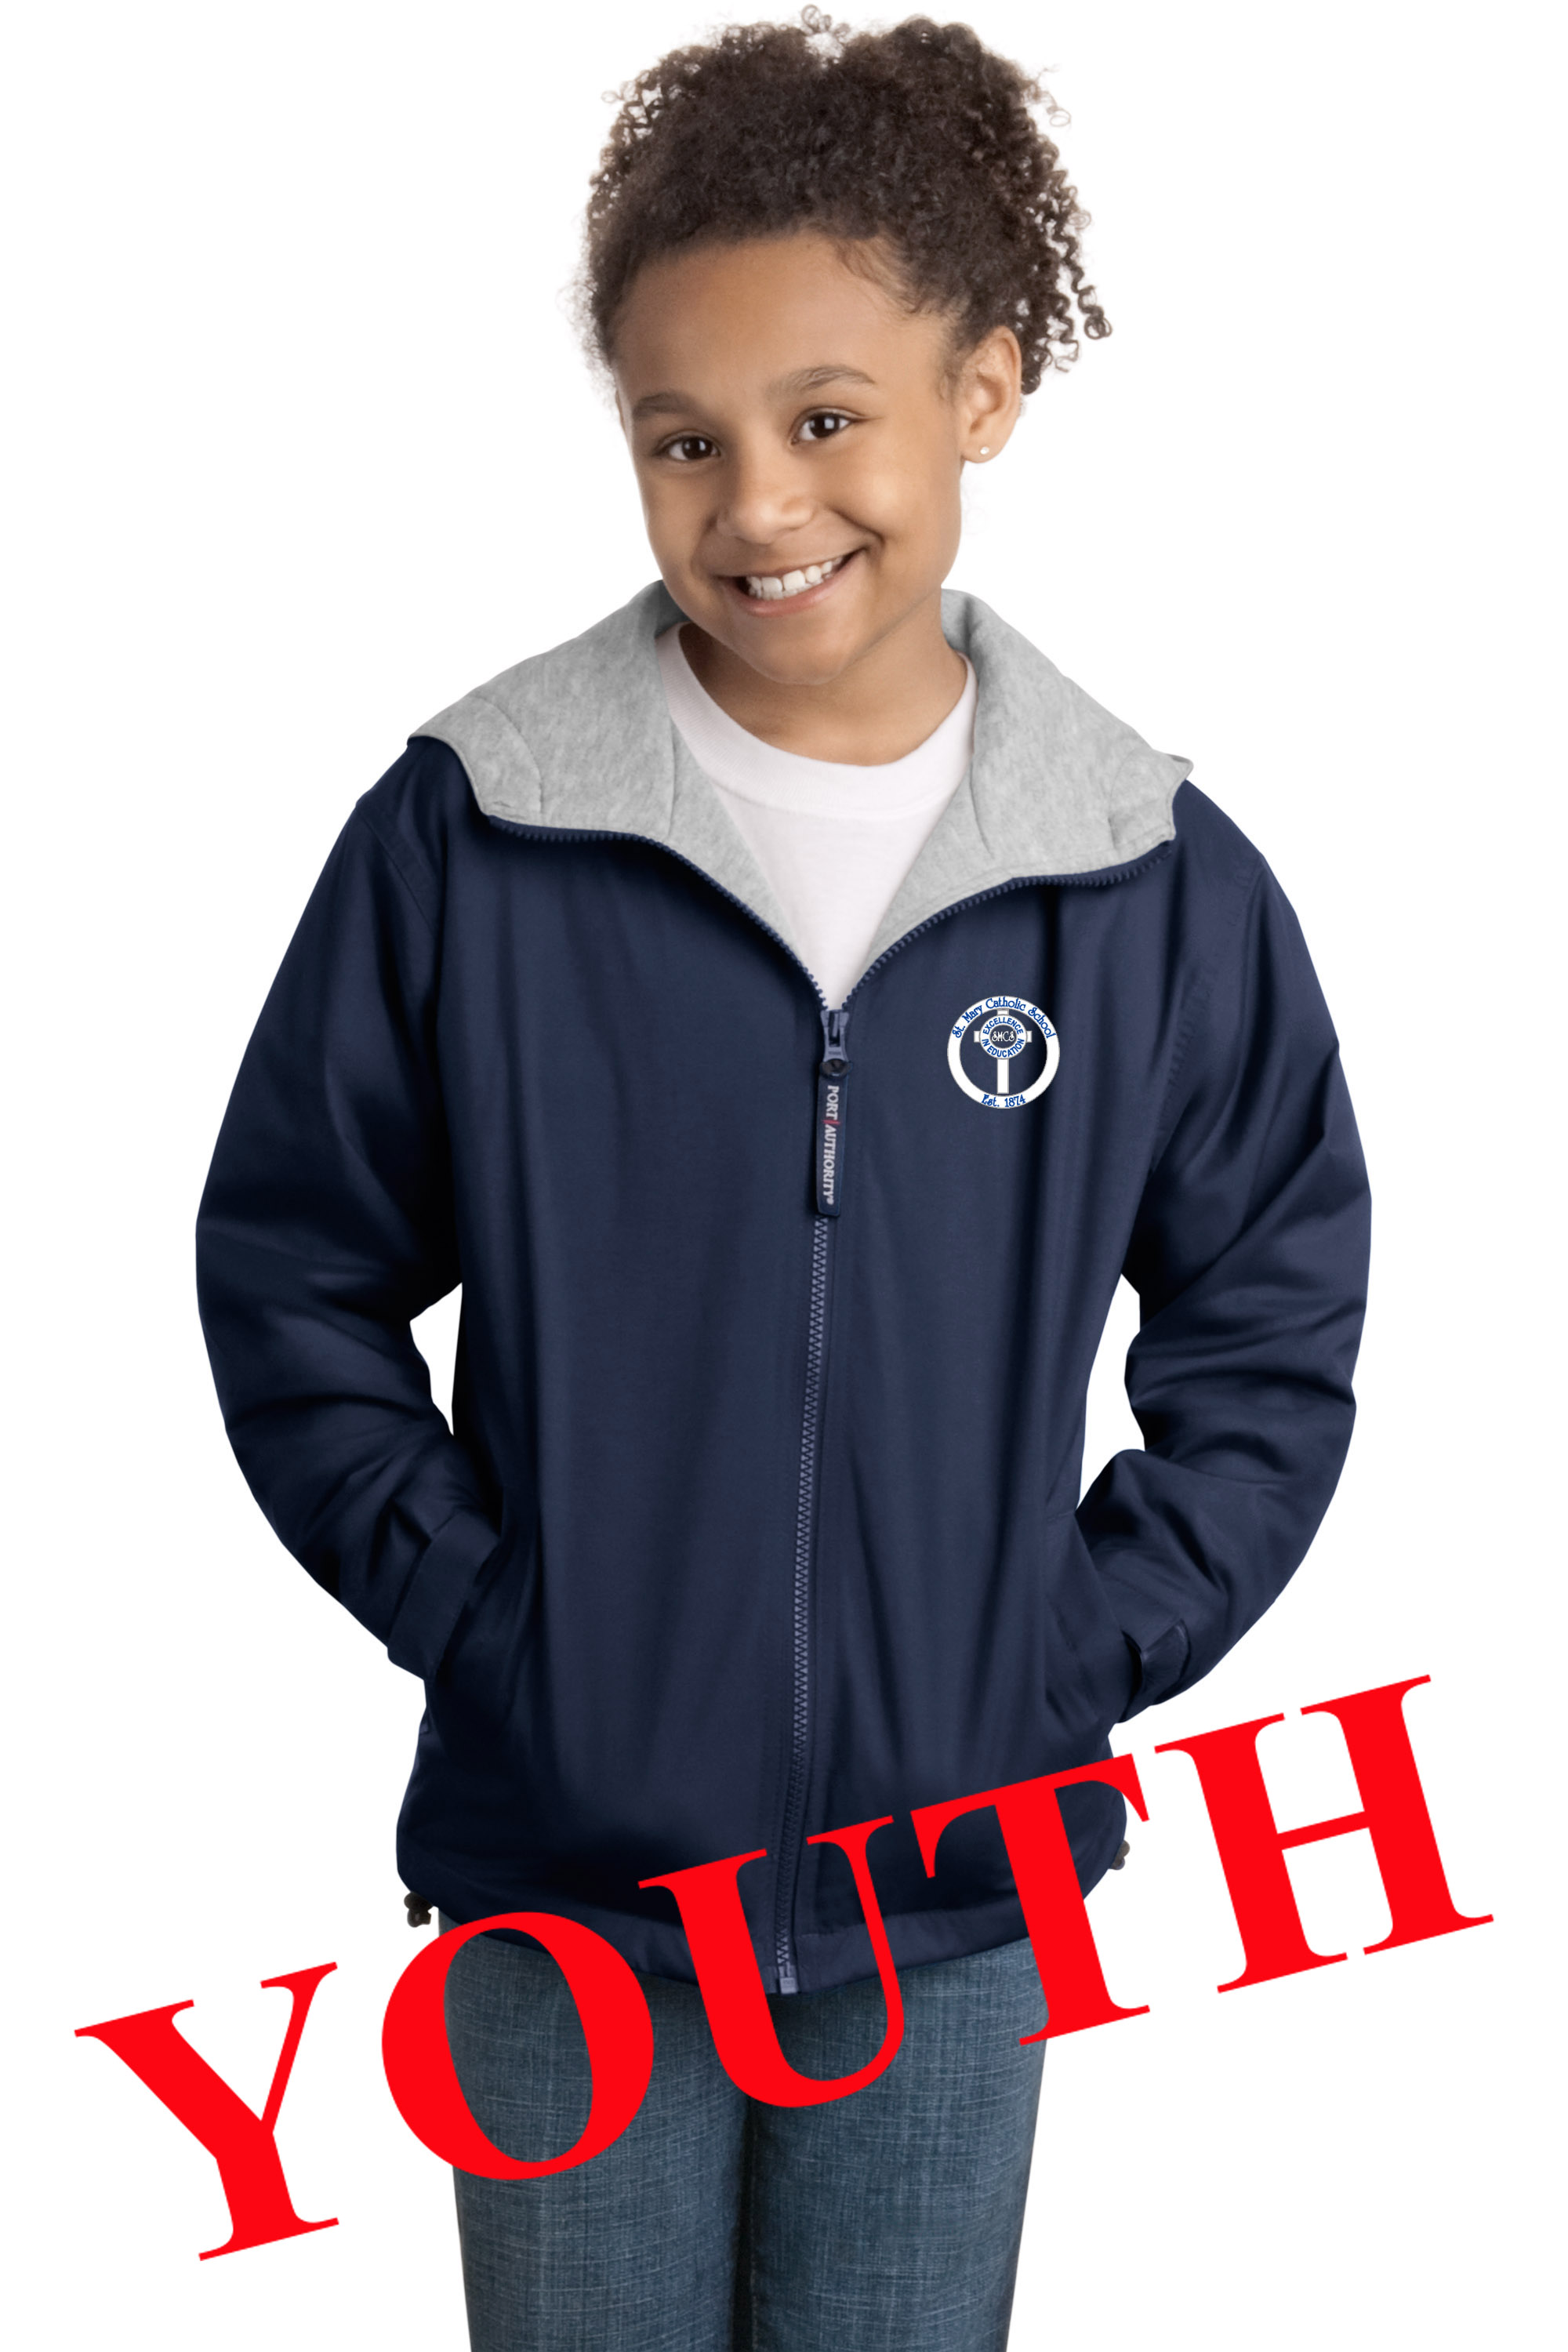 D2-YP56 Youth Team Jacket with Embroidery Left Chest